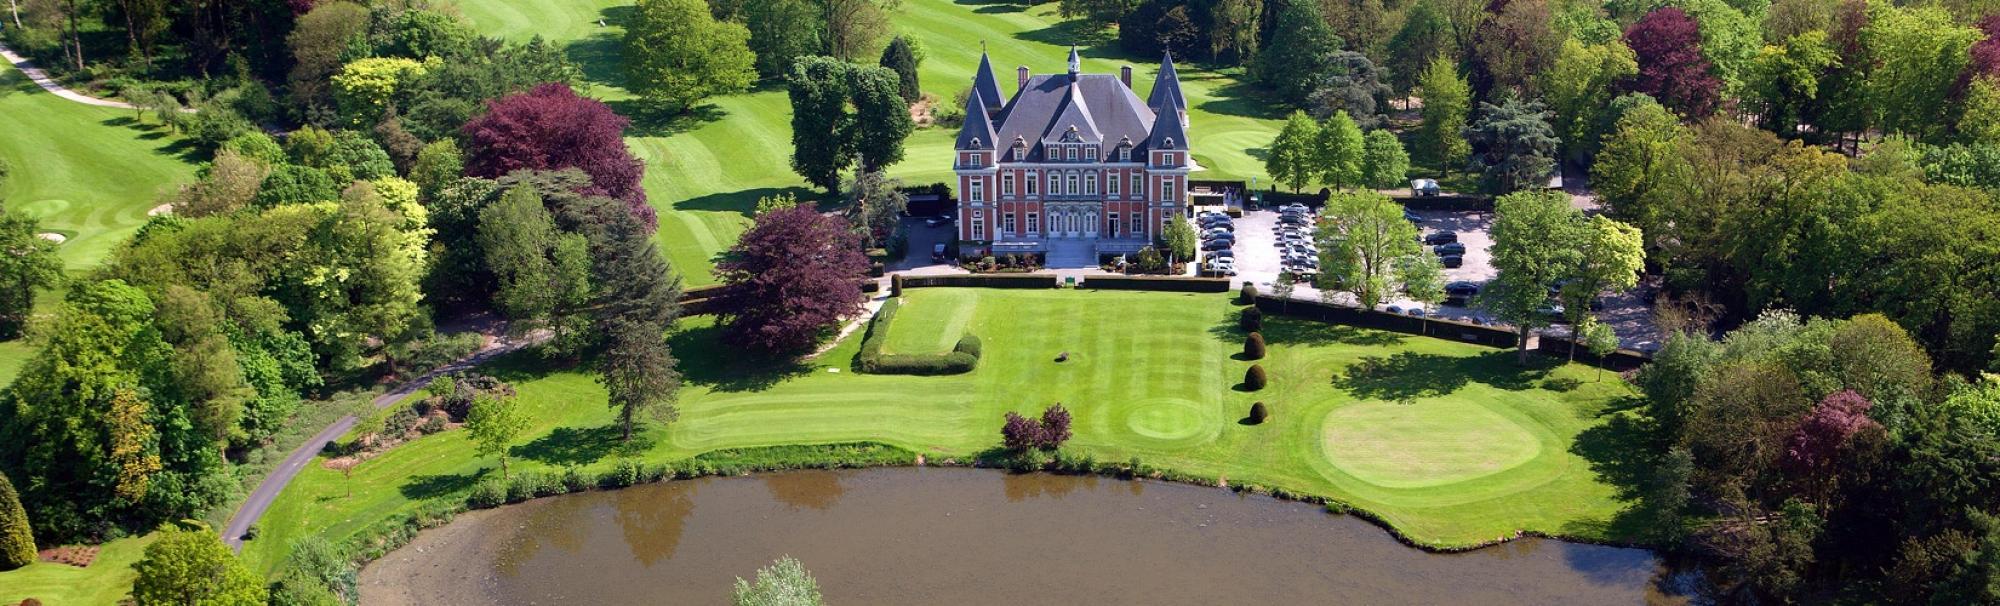 The Golf  Country Club Oudenaarde The Kasteel's scenic golf course in sensational Bruges.